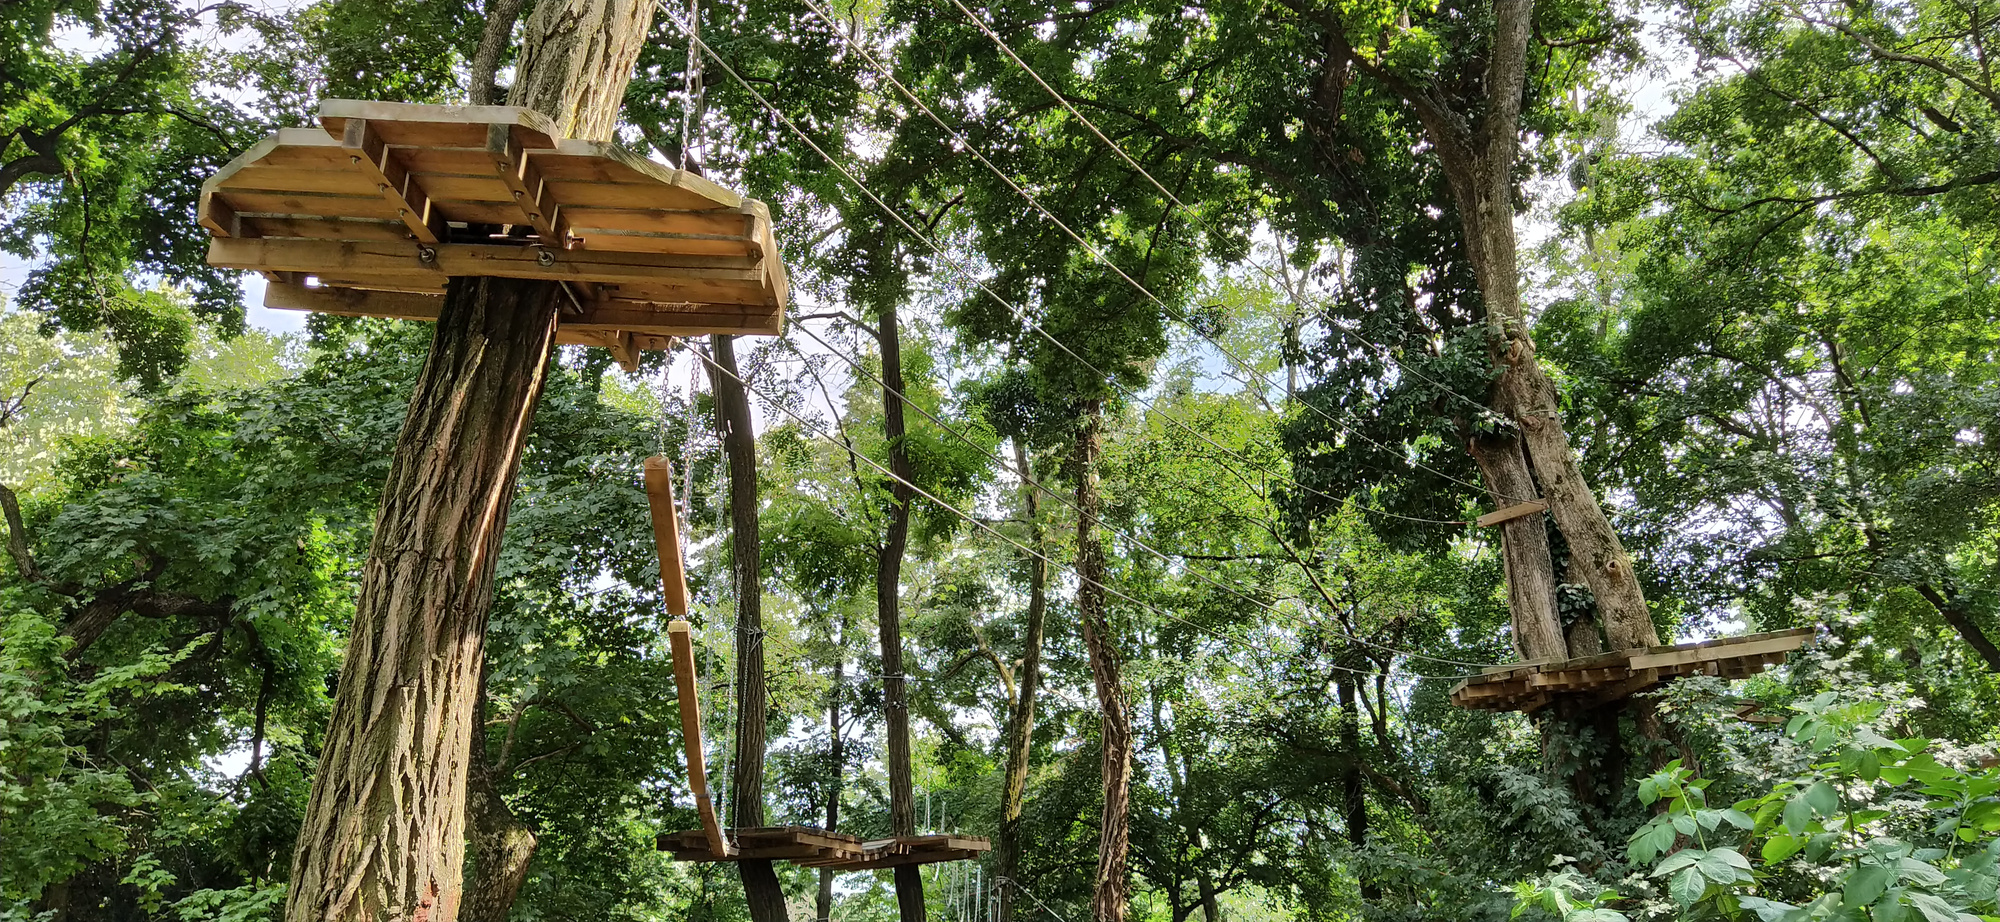 Go Ape Adventure. Located in national parks and local recreational facilities, Go Ape is a challenging obstacle course in the trees. Wooden and rope structures for movement. Sports fun competitions